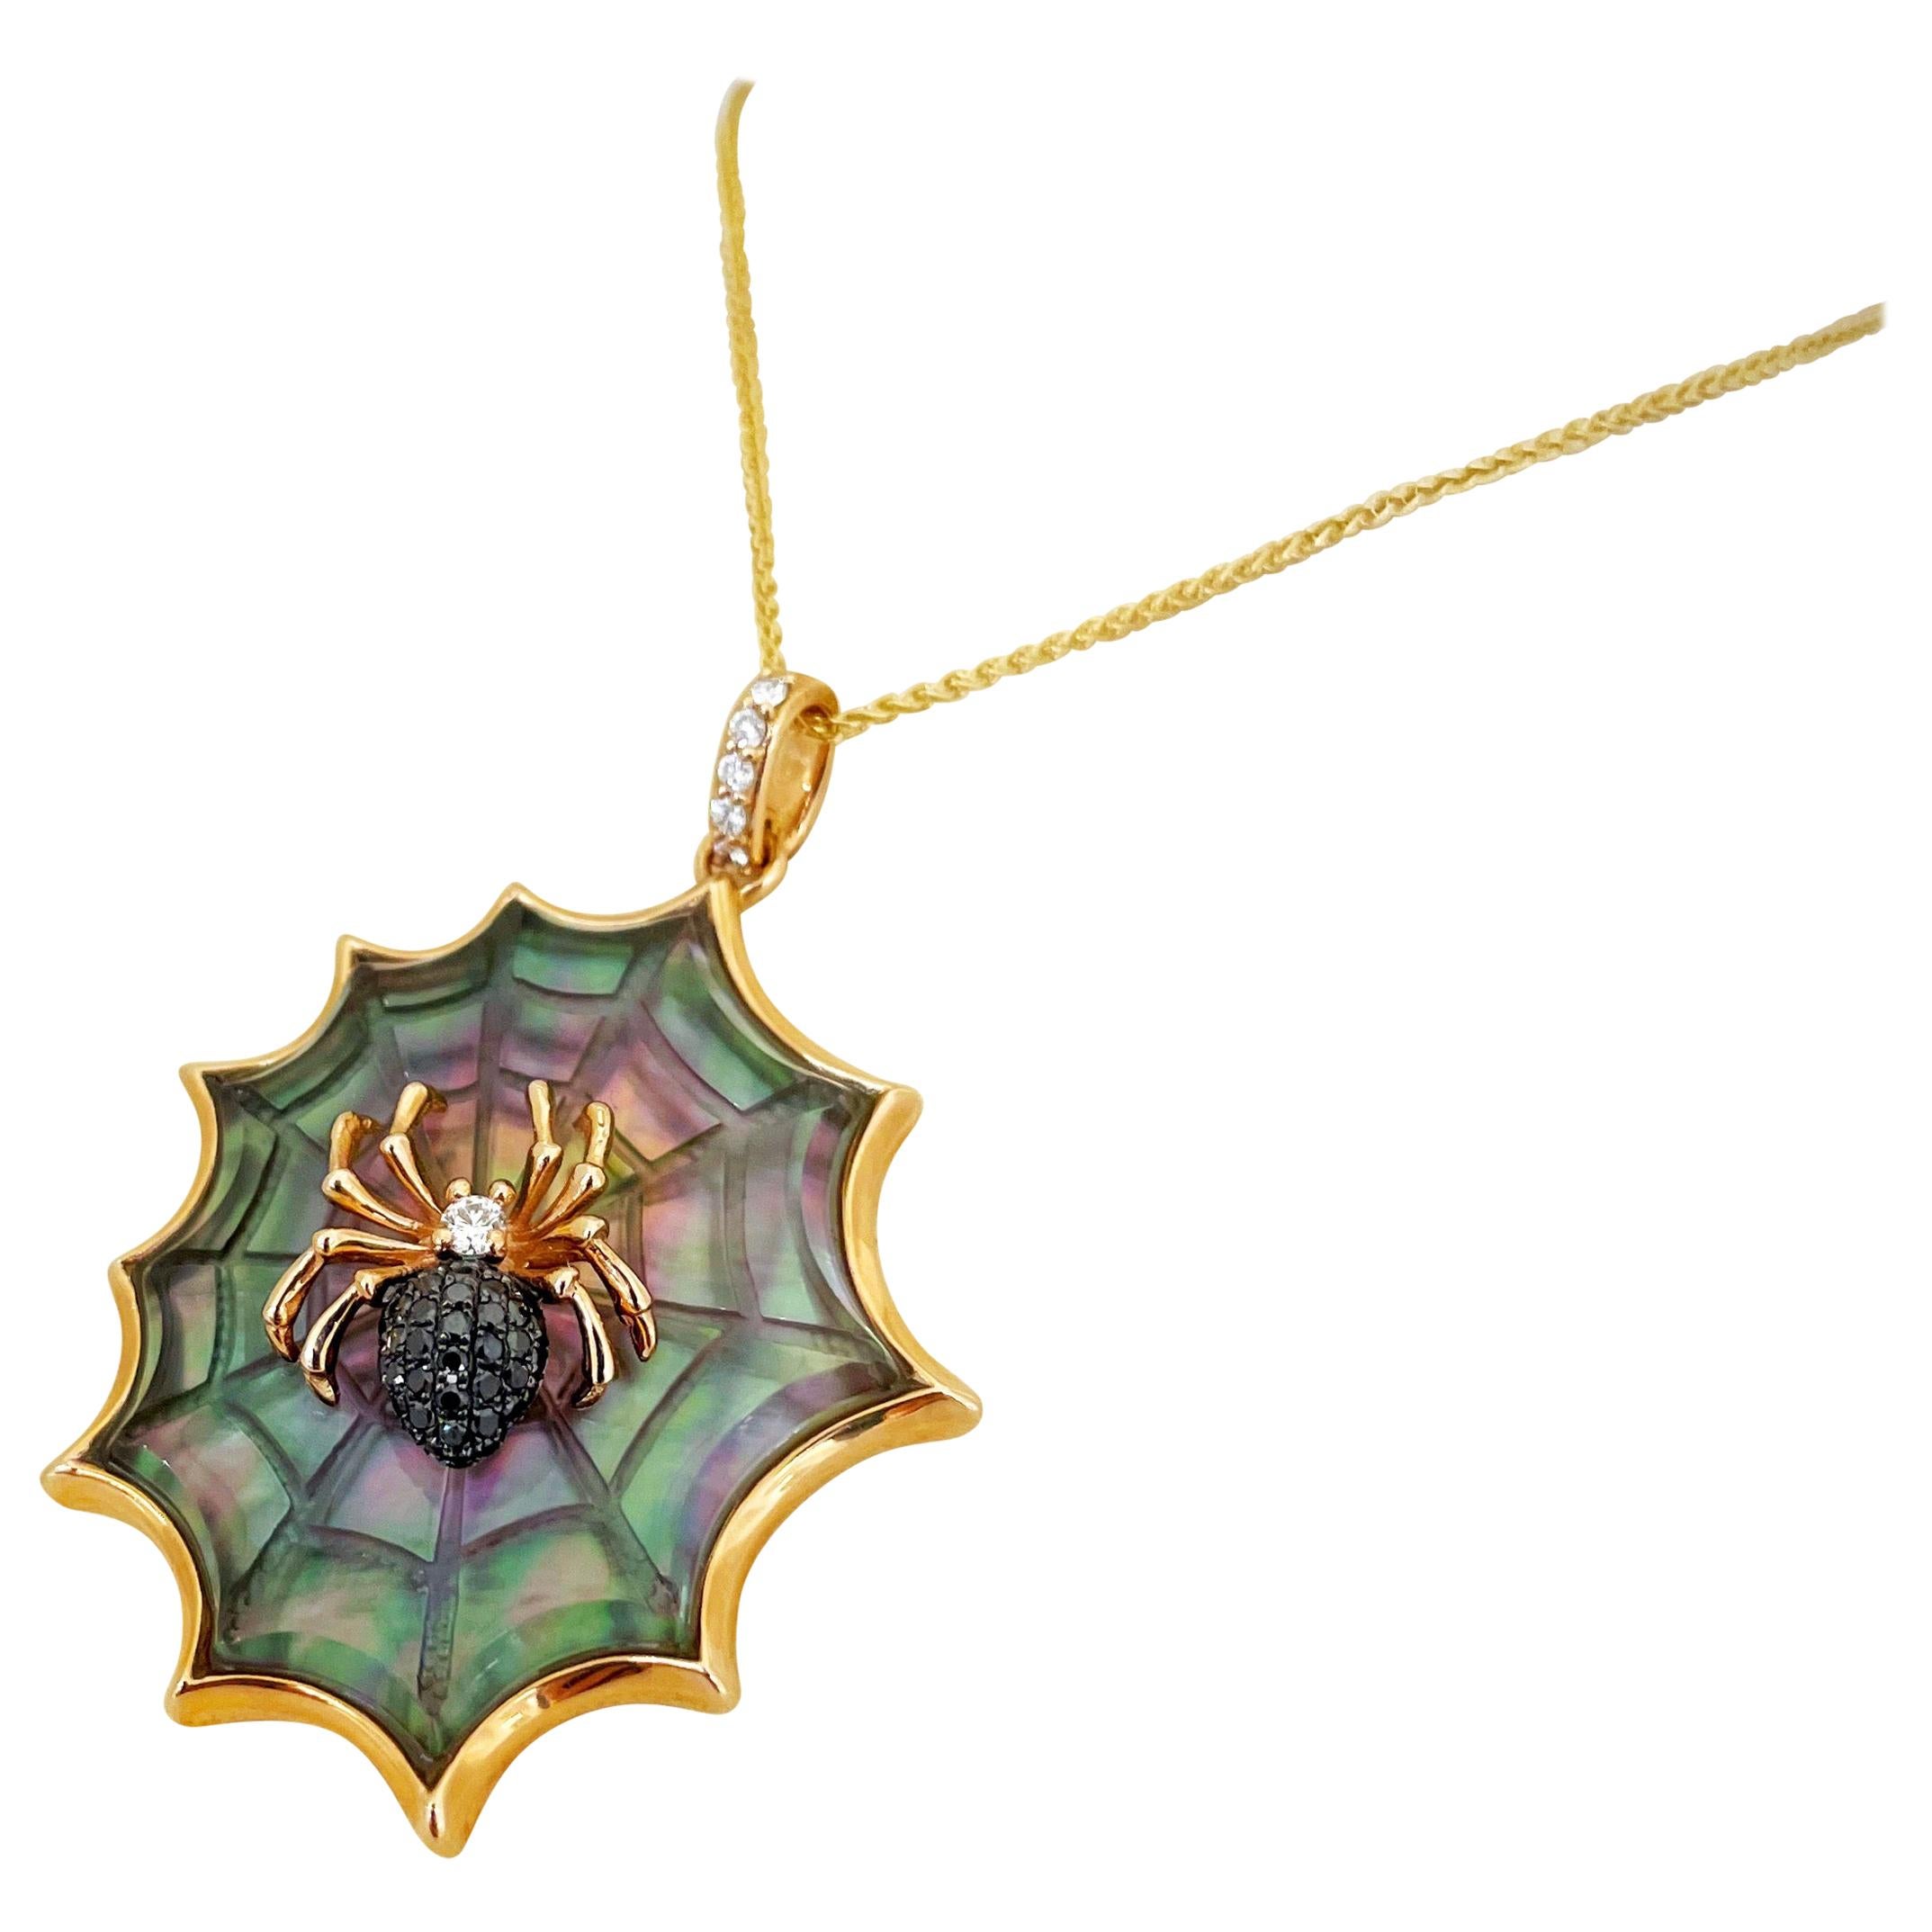 Asch Grossbardt 18KT RG Spider Web Pendant with Black Diamond & Mother of Pearl